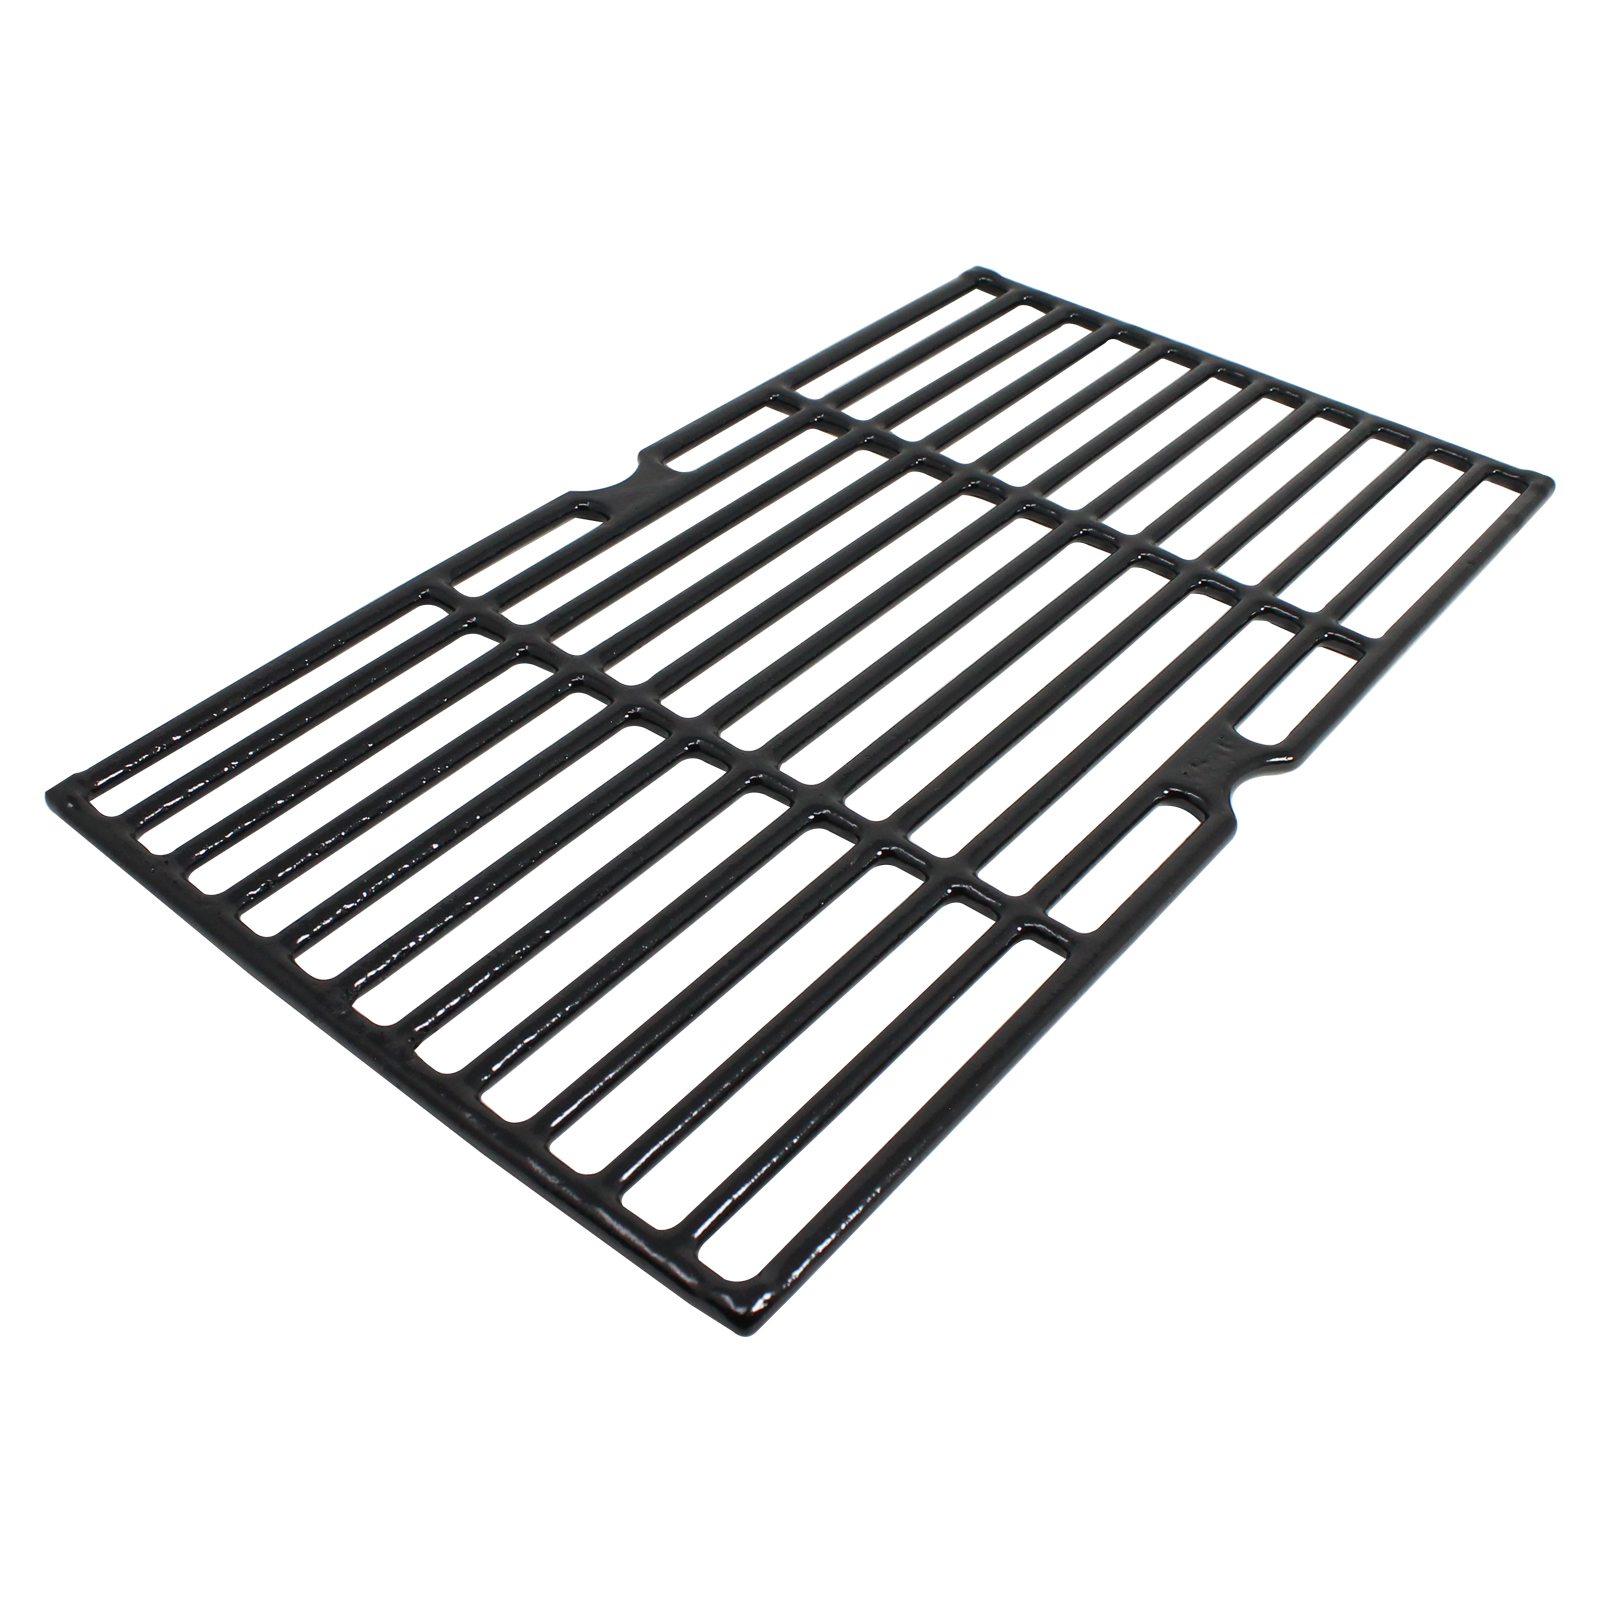 3-Pack BBQ Grill Cooking Grates Replacement Parts for Kenmore 41516117 - Compatible Barbeque Cast Iron Grid 16 3/4" - image 2 of 4